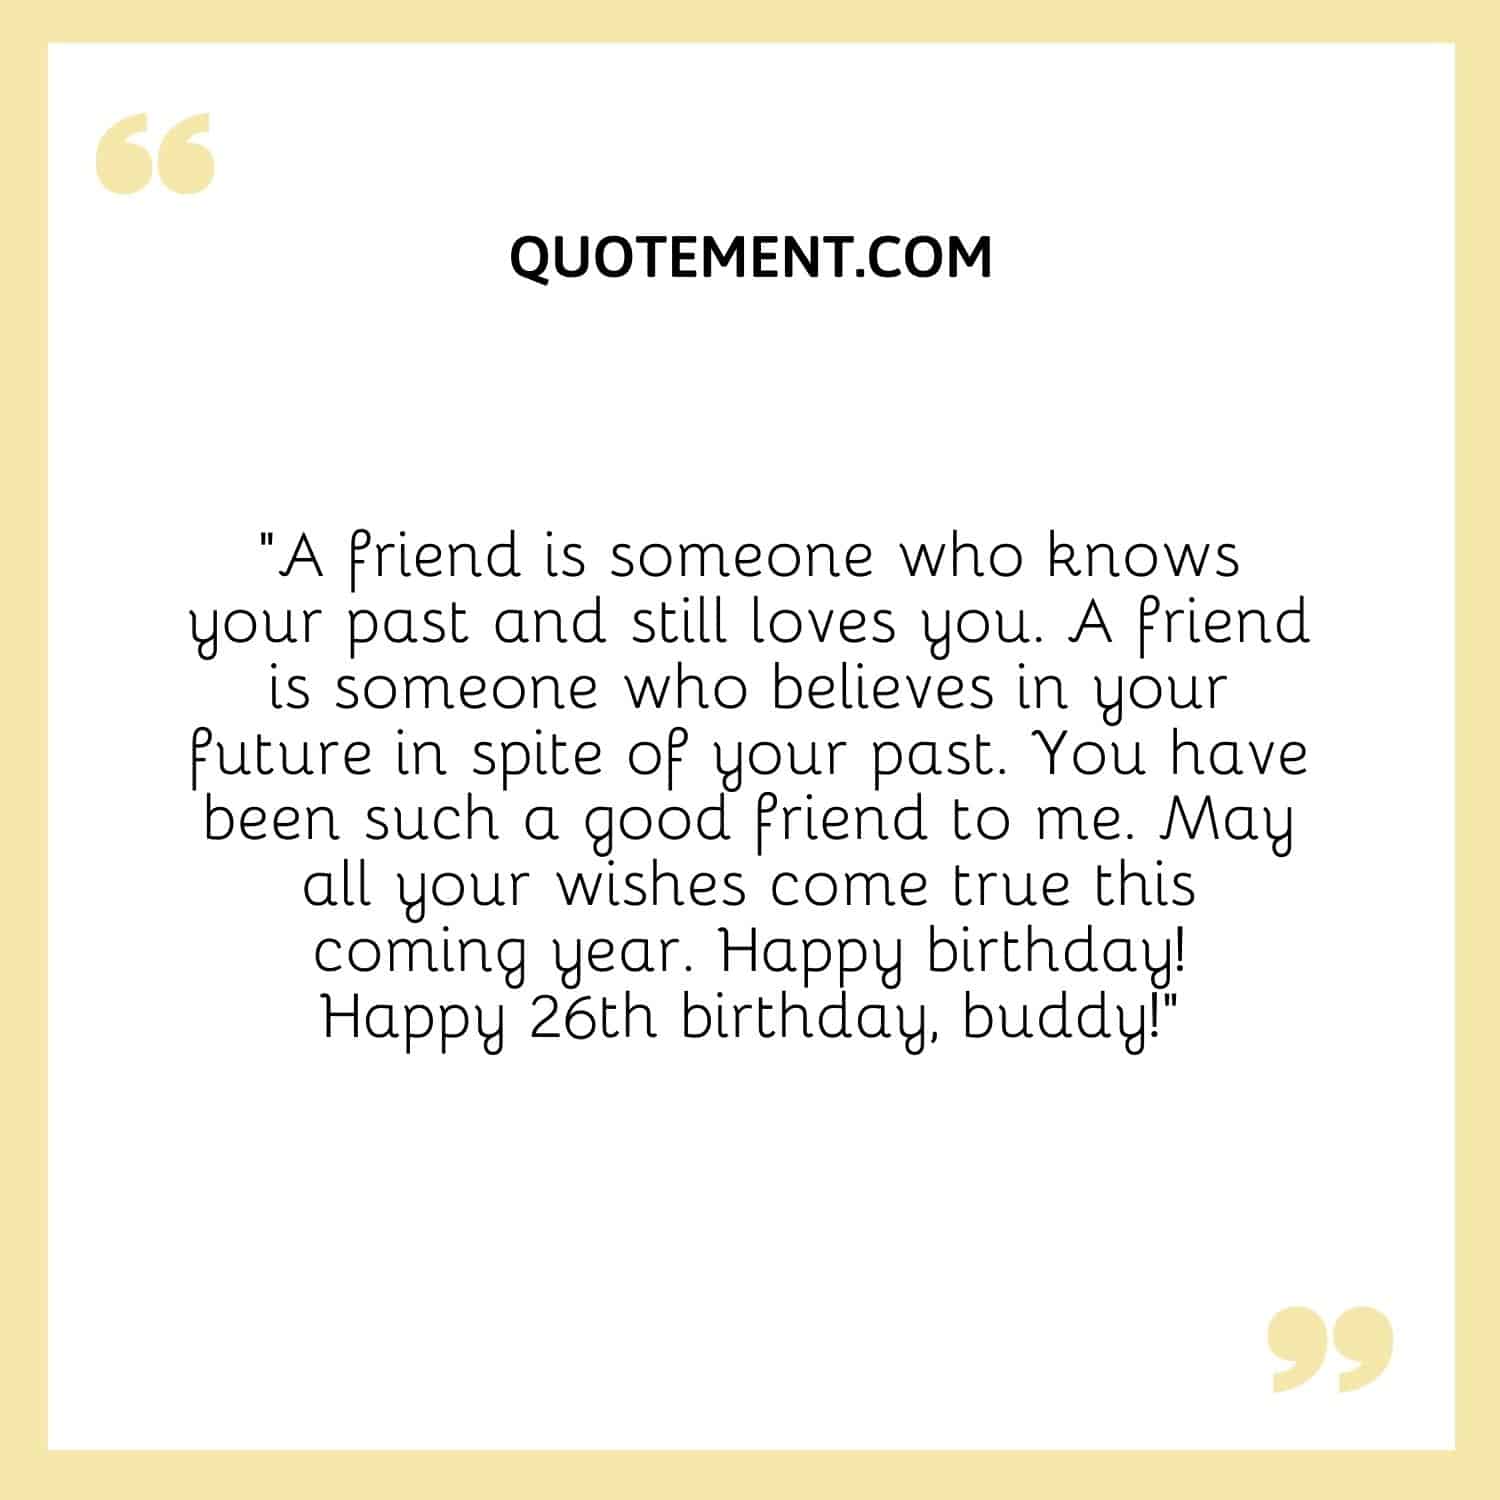 A friend is someone who knows your past and still loves you.